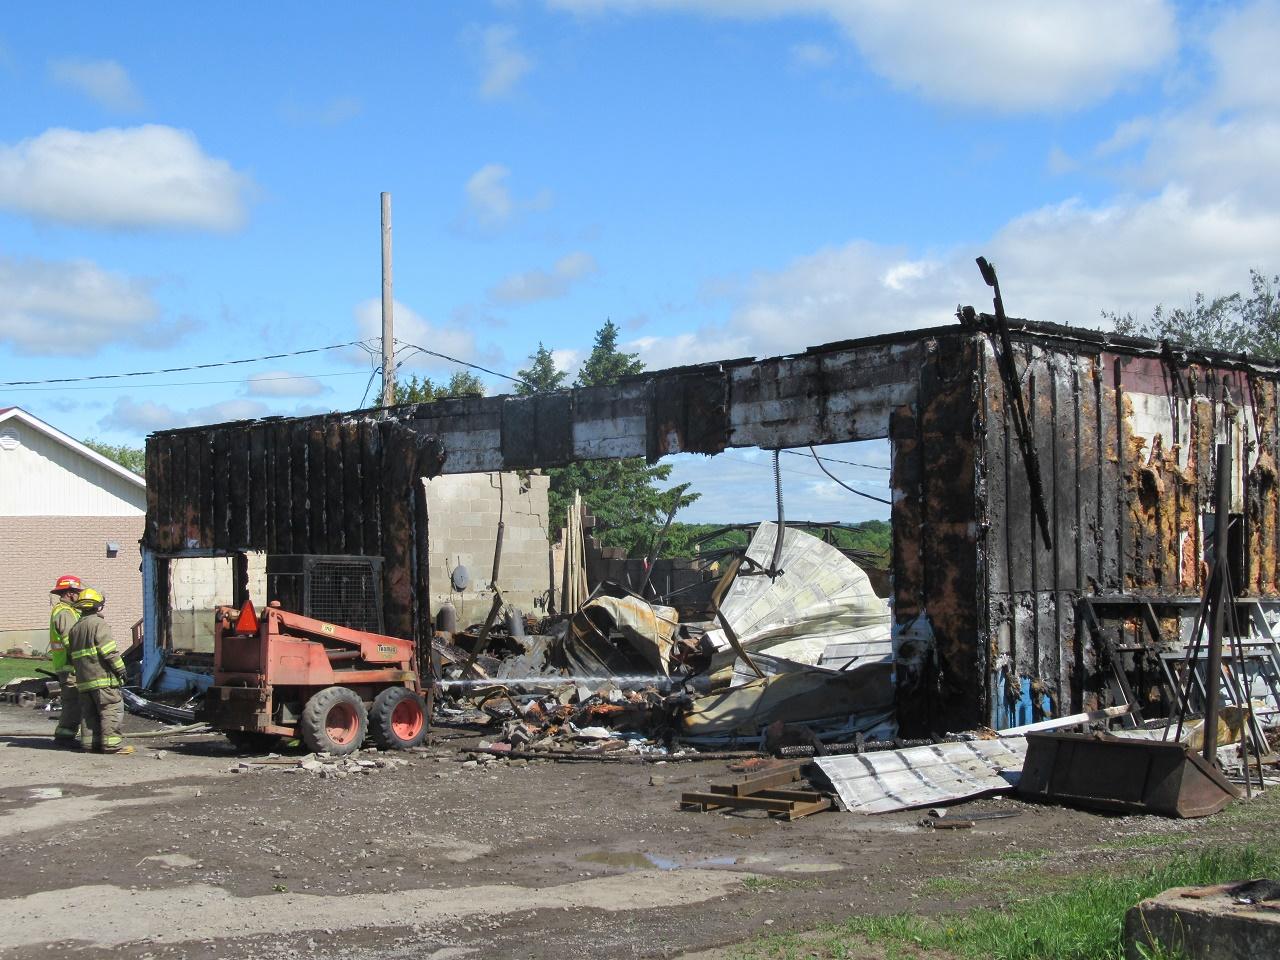 OPP, Fire Marshal investigating cause of garage fire in Chute-à-Blondeau